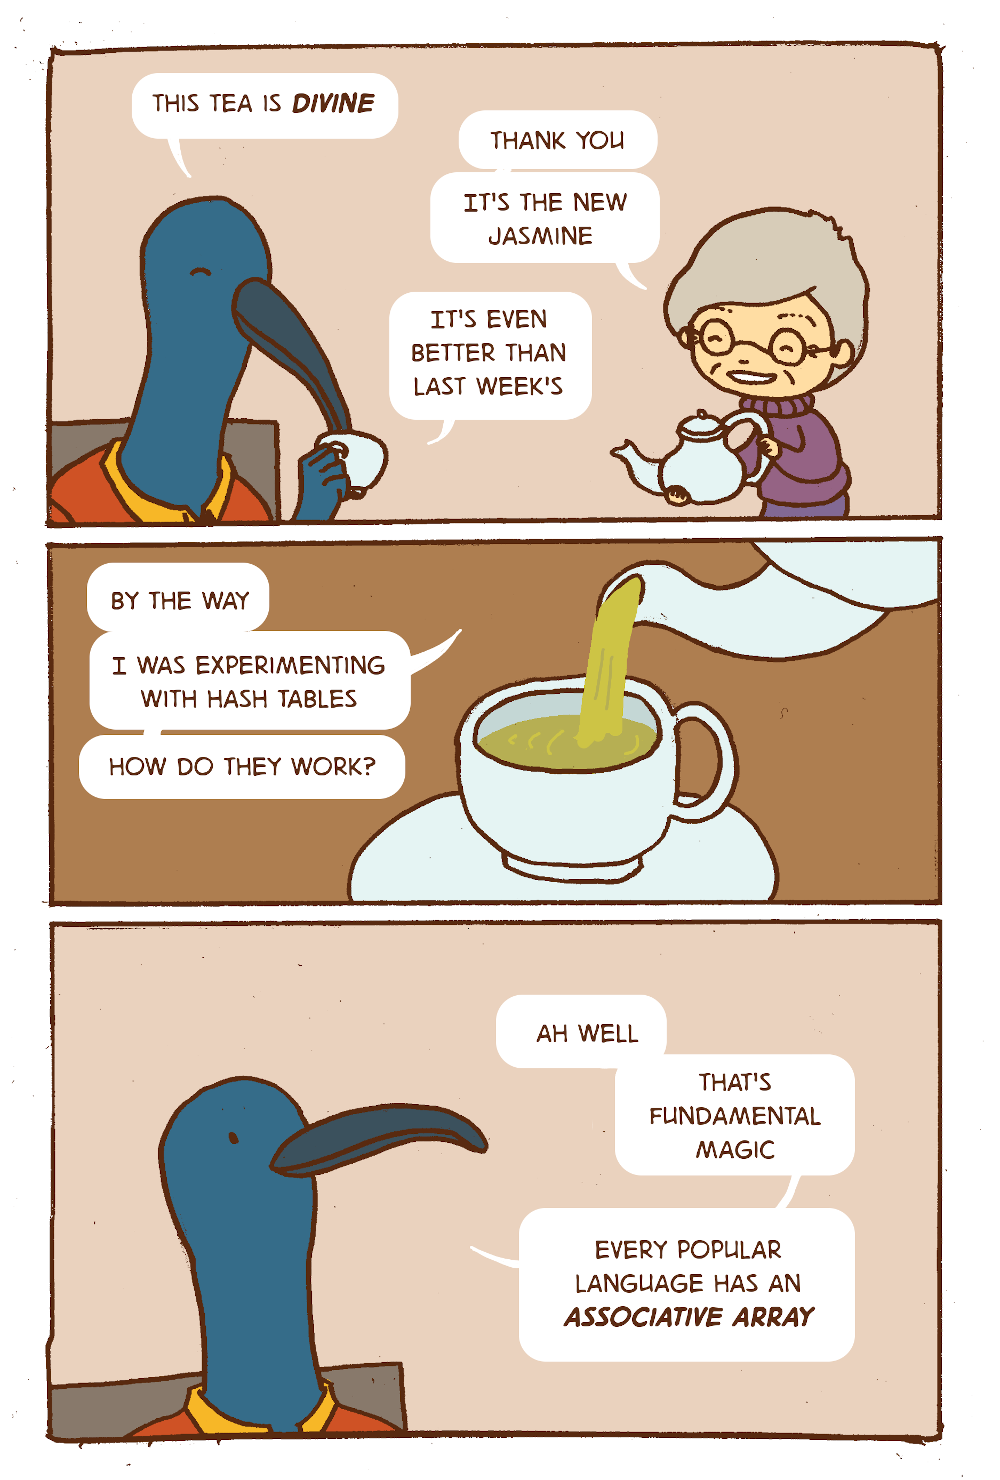 Teatime with Thoth